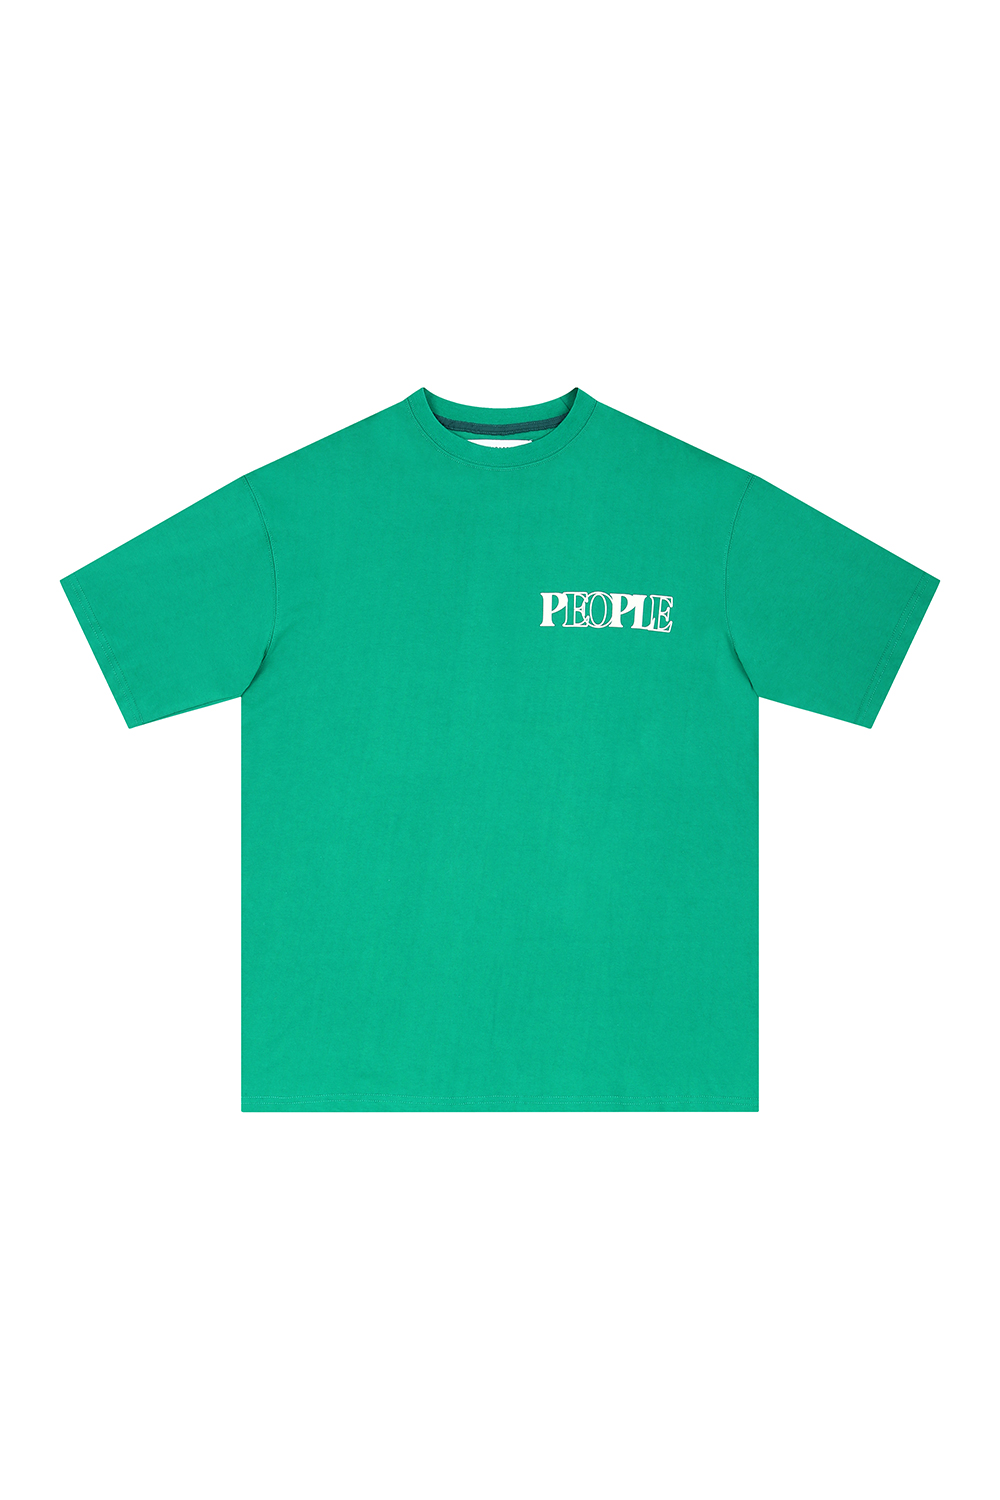 10TH ARCHIVE SIMPLE GREEN LOGO T-SHIRTS